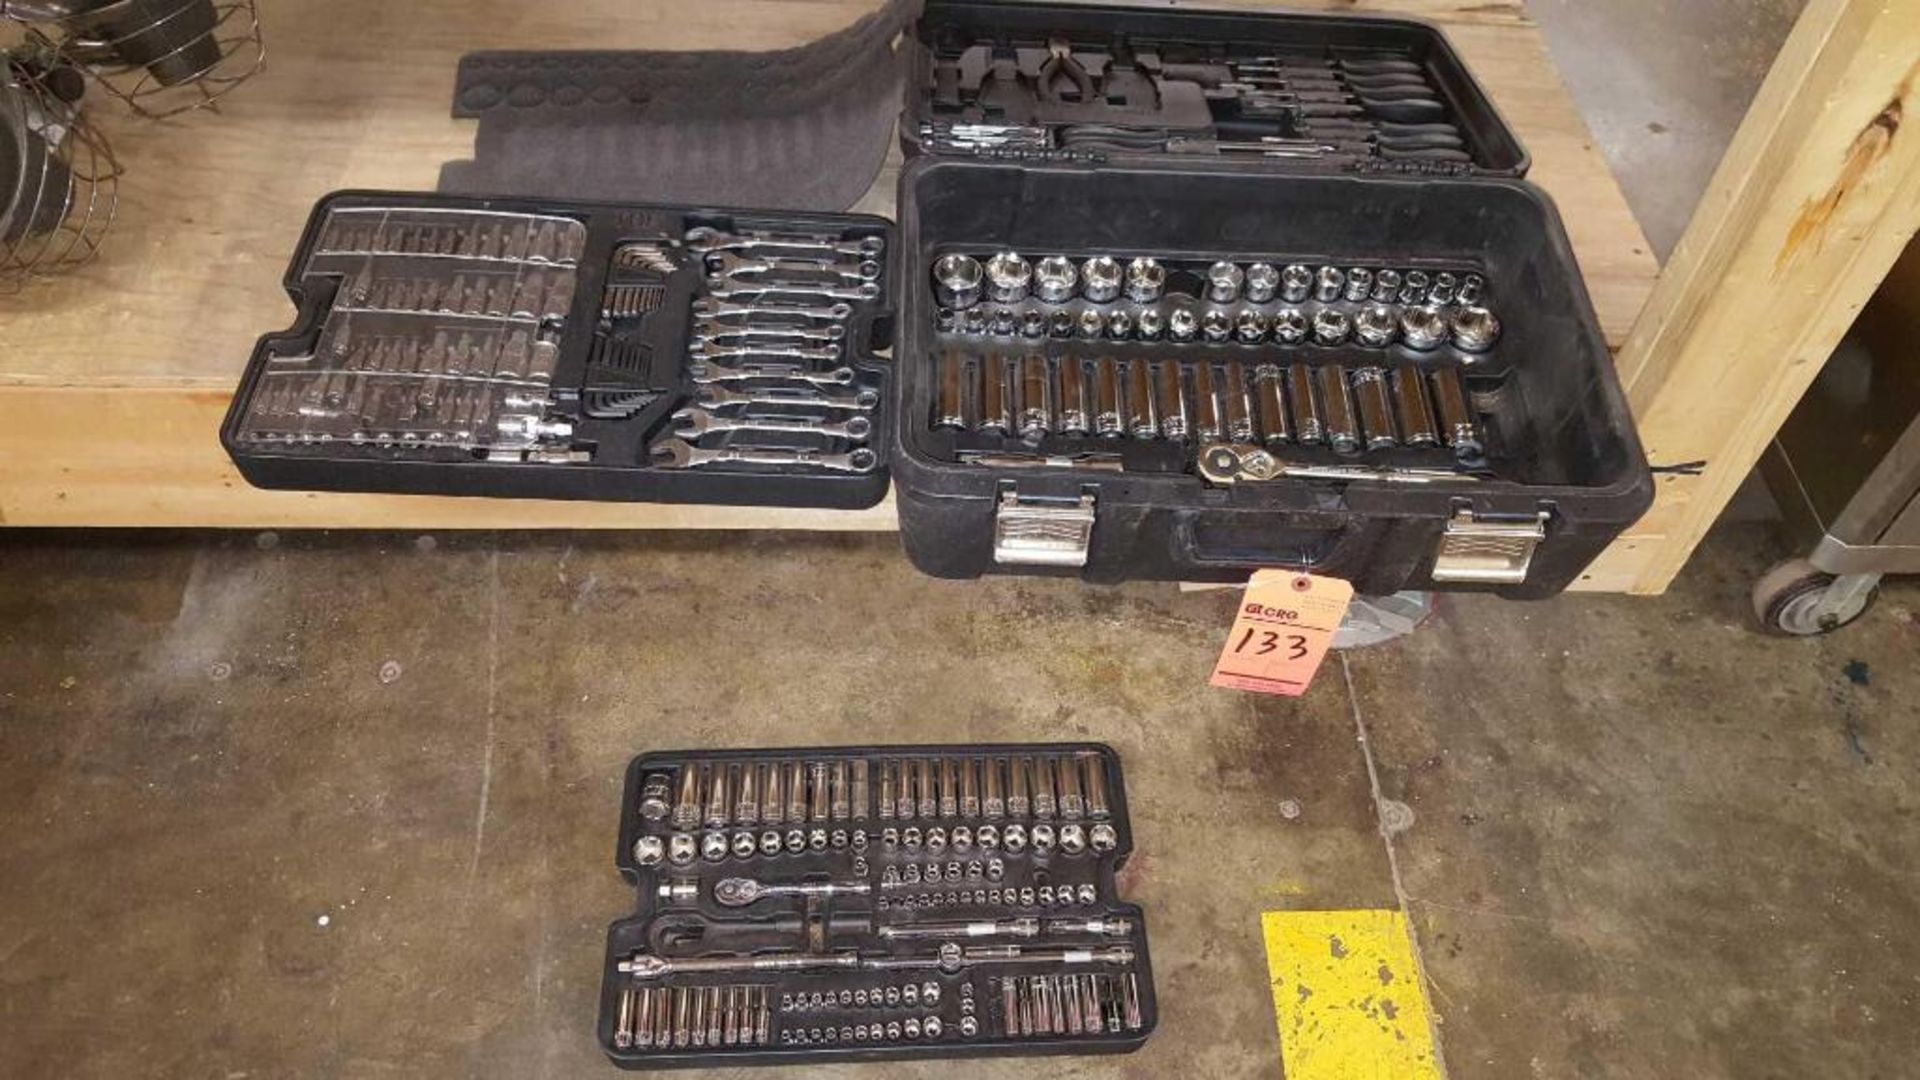 Tool box with assorted ratchet wrenches, box wrenches, screw drivers, etc.